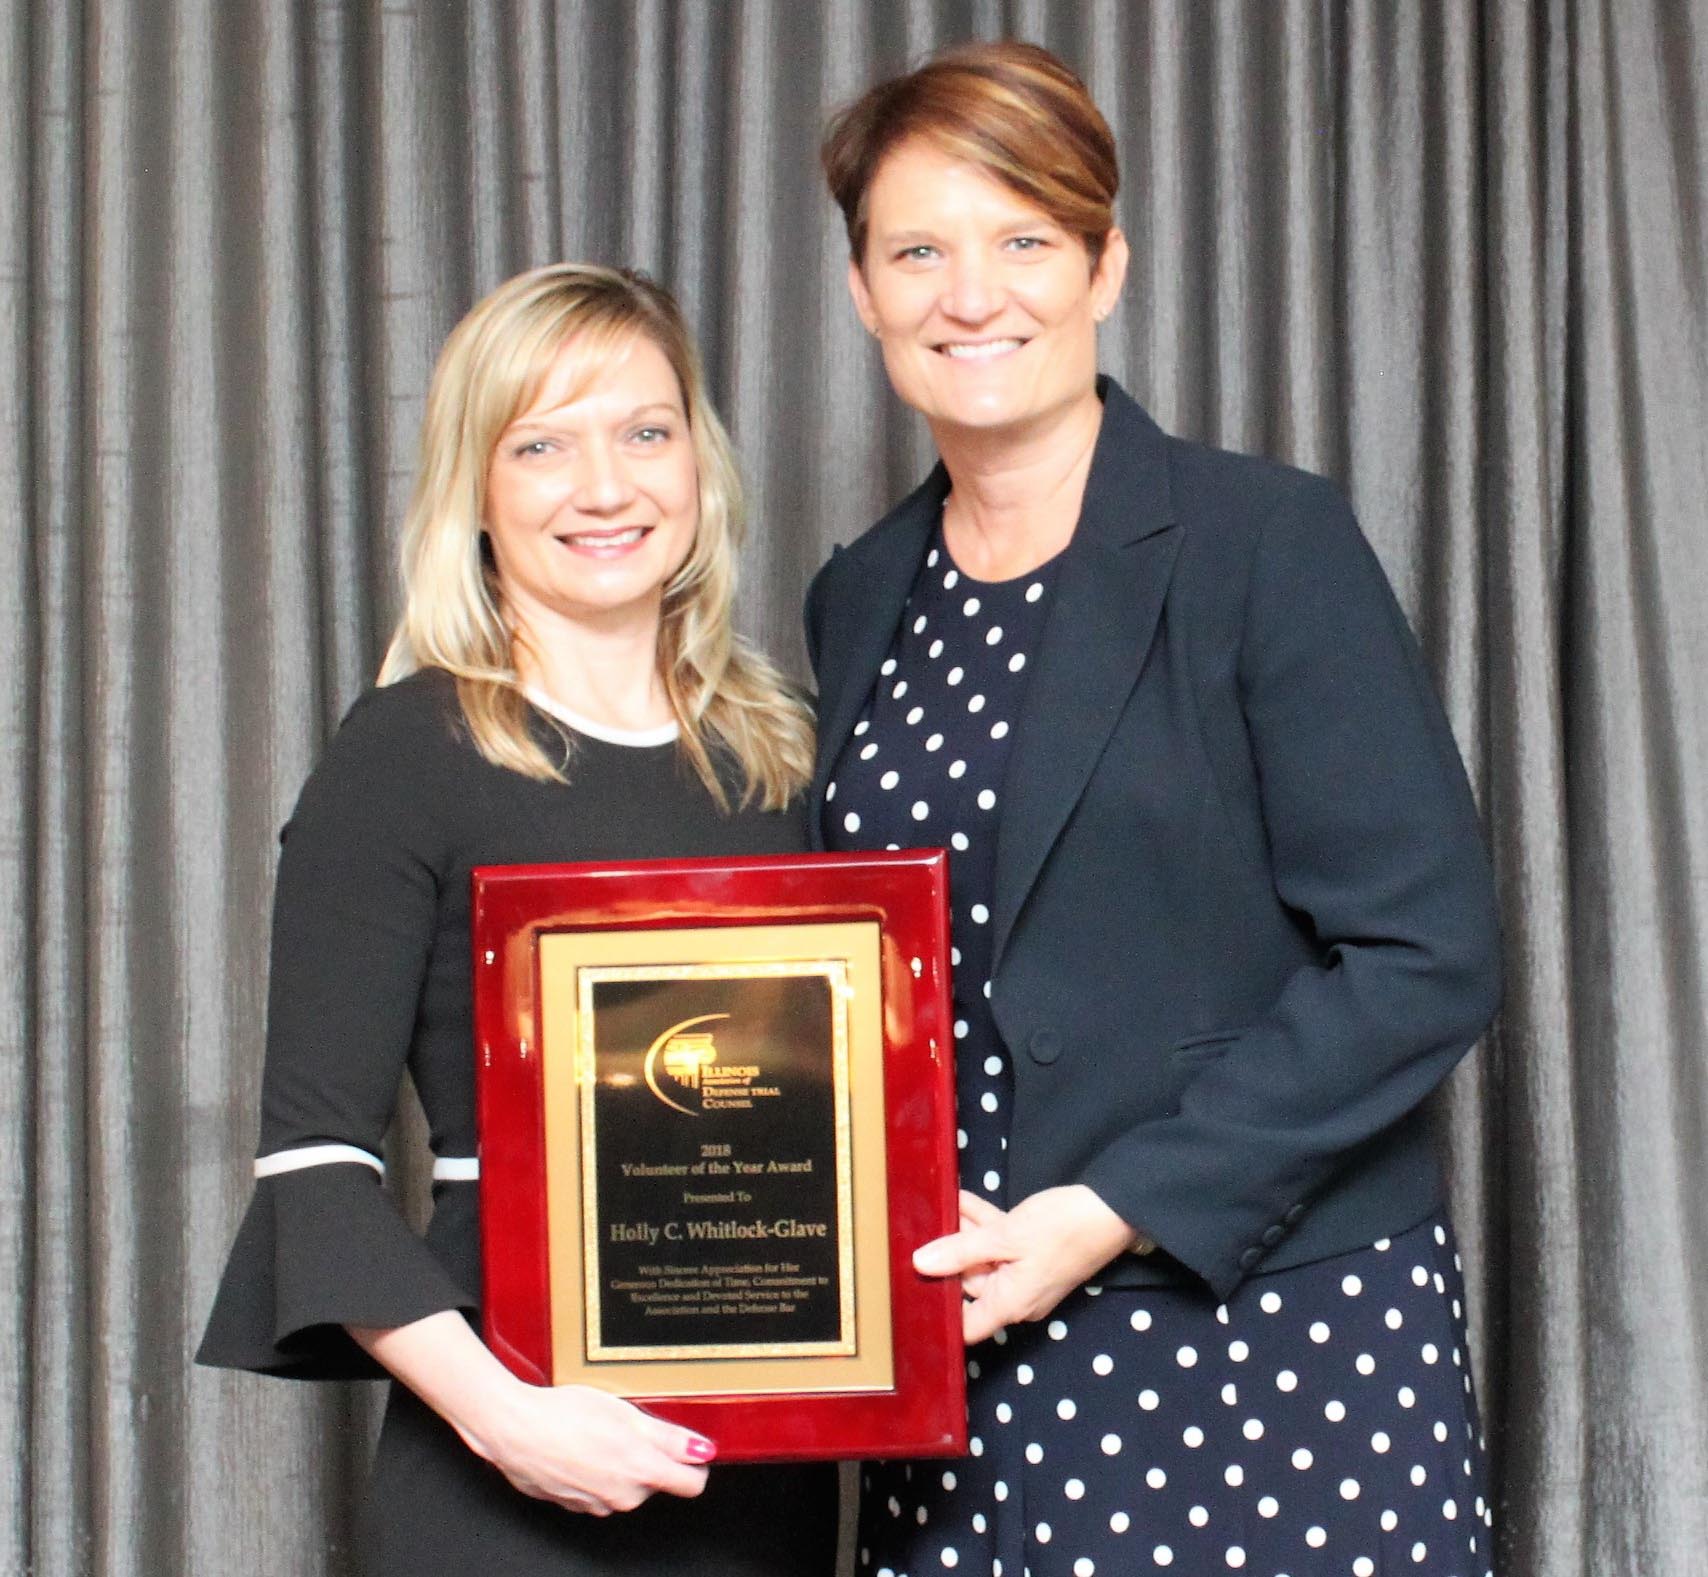 HeplerBroom attorney Holly Whitlock-Glave receiving Volunteer of the Year Award from IDC Executive Director Sandra Wulf